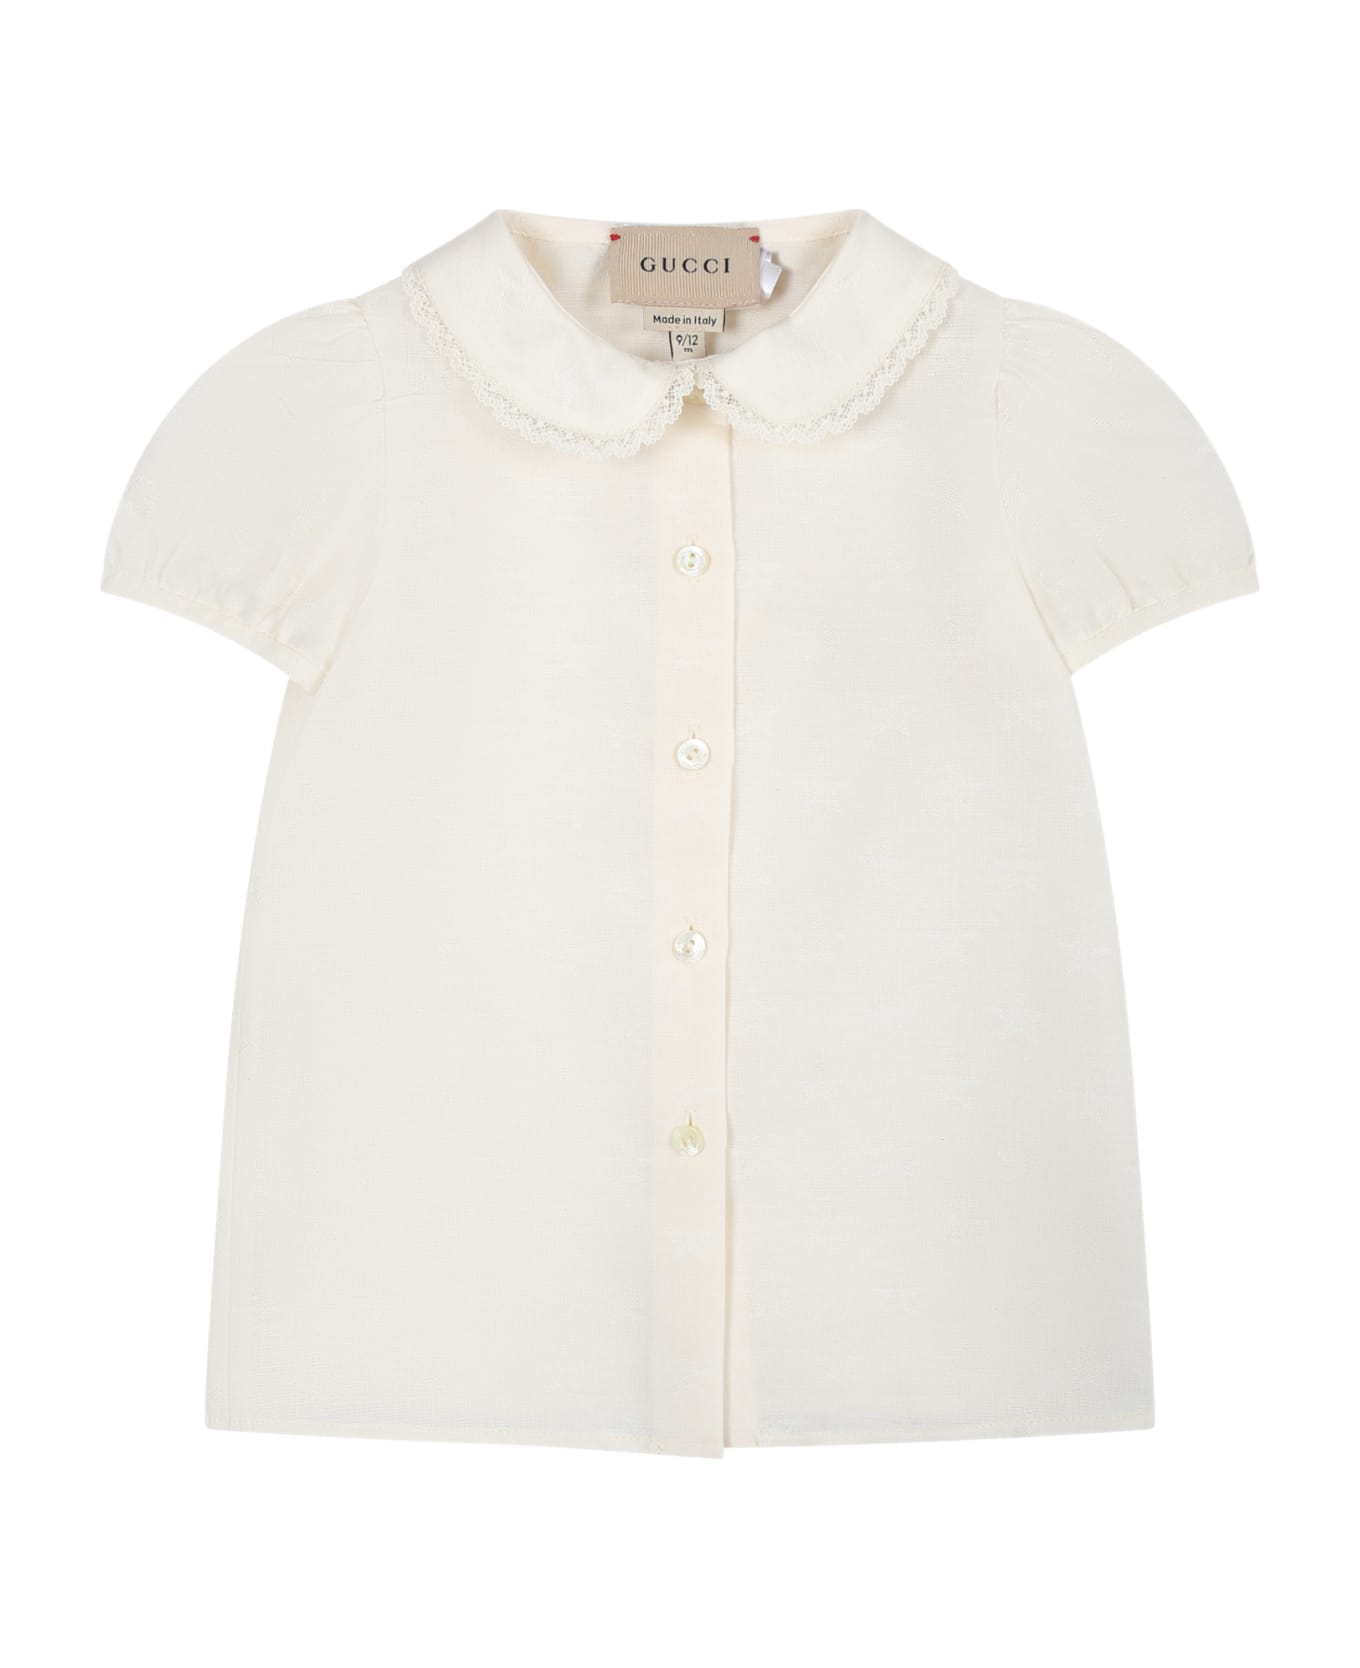 Gucci White Shirt For Baby Girl With Stars And Gg All-over - White シャツ